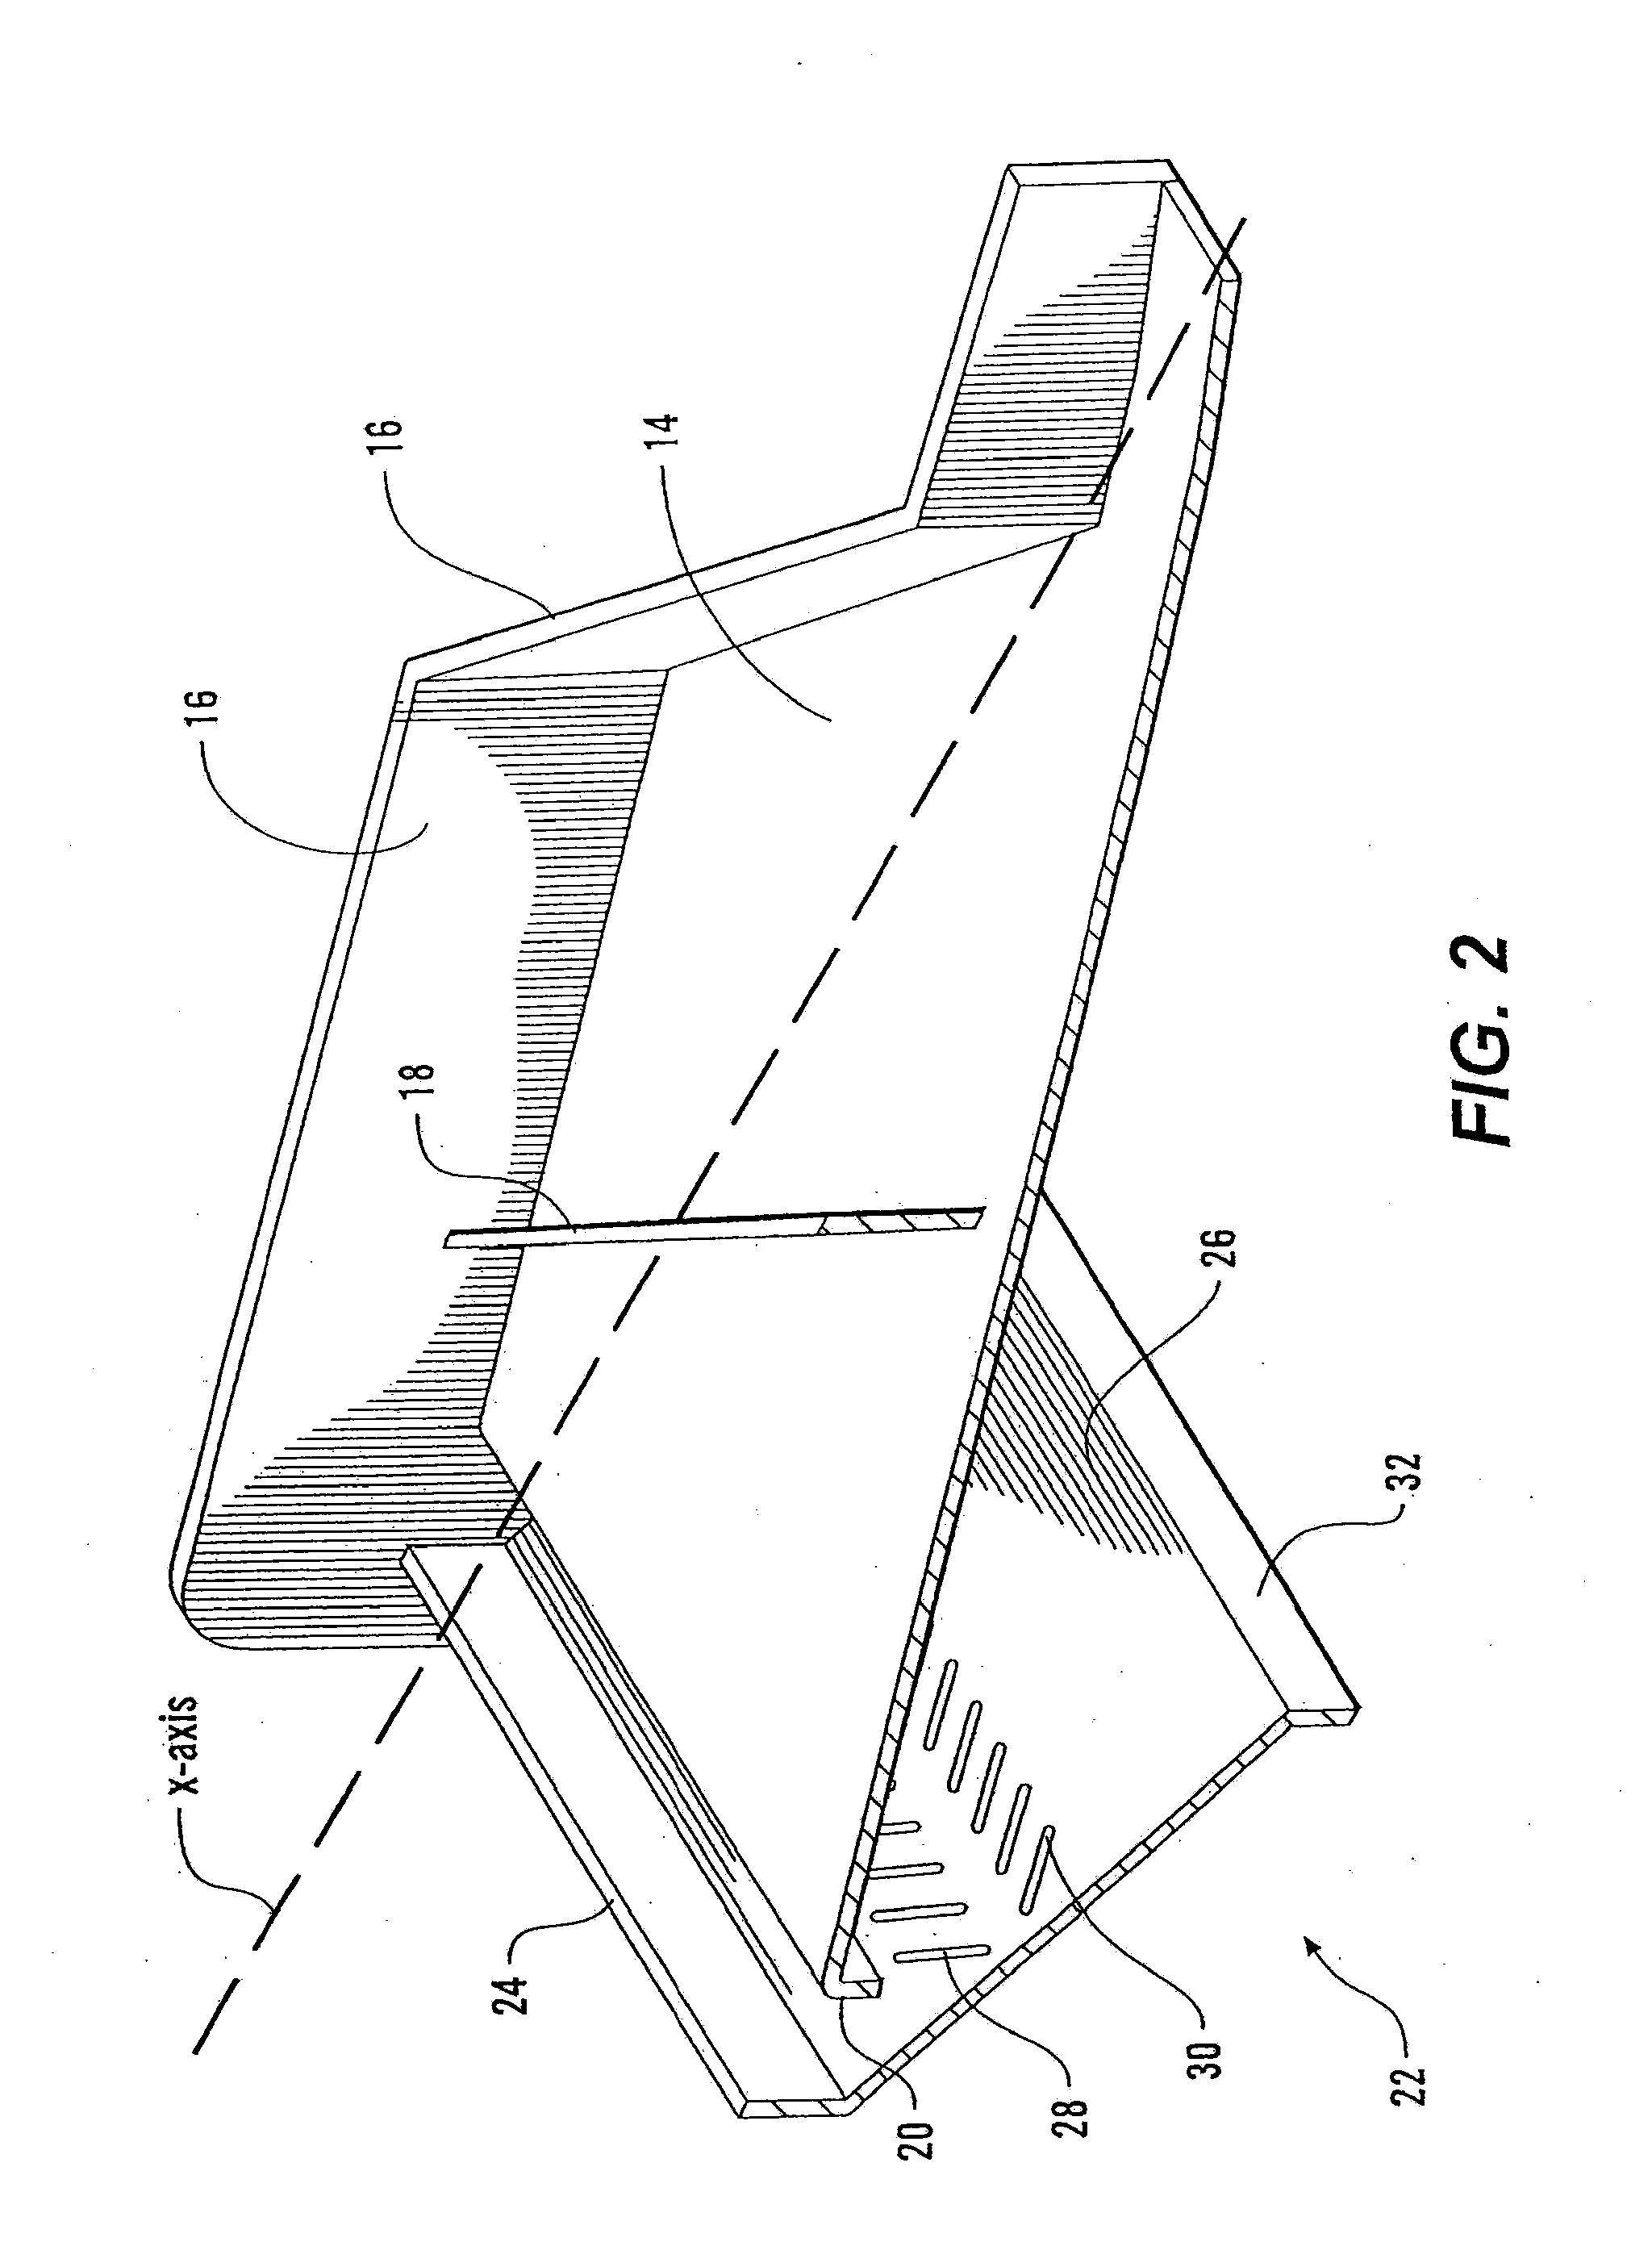 Food Coating and Topping Applicator Apparatus and Methods of Use Thereof